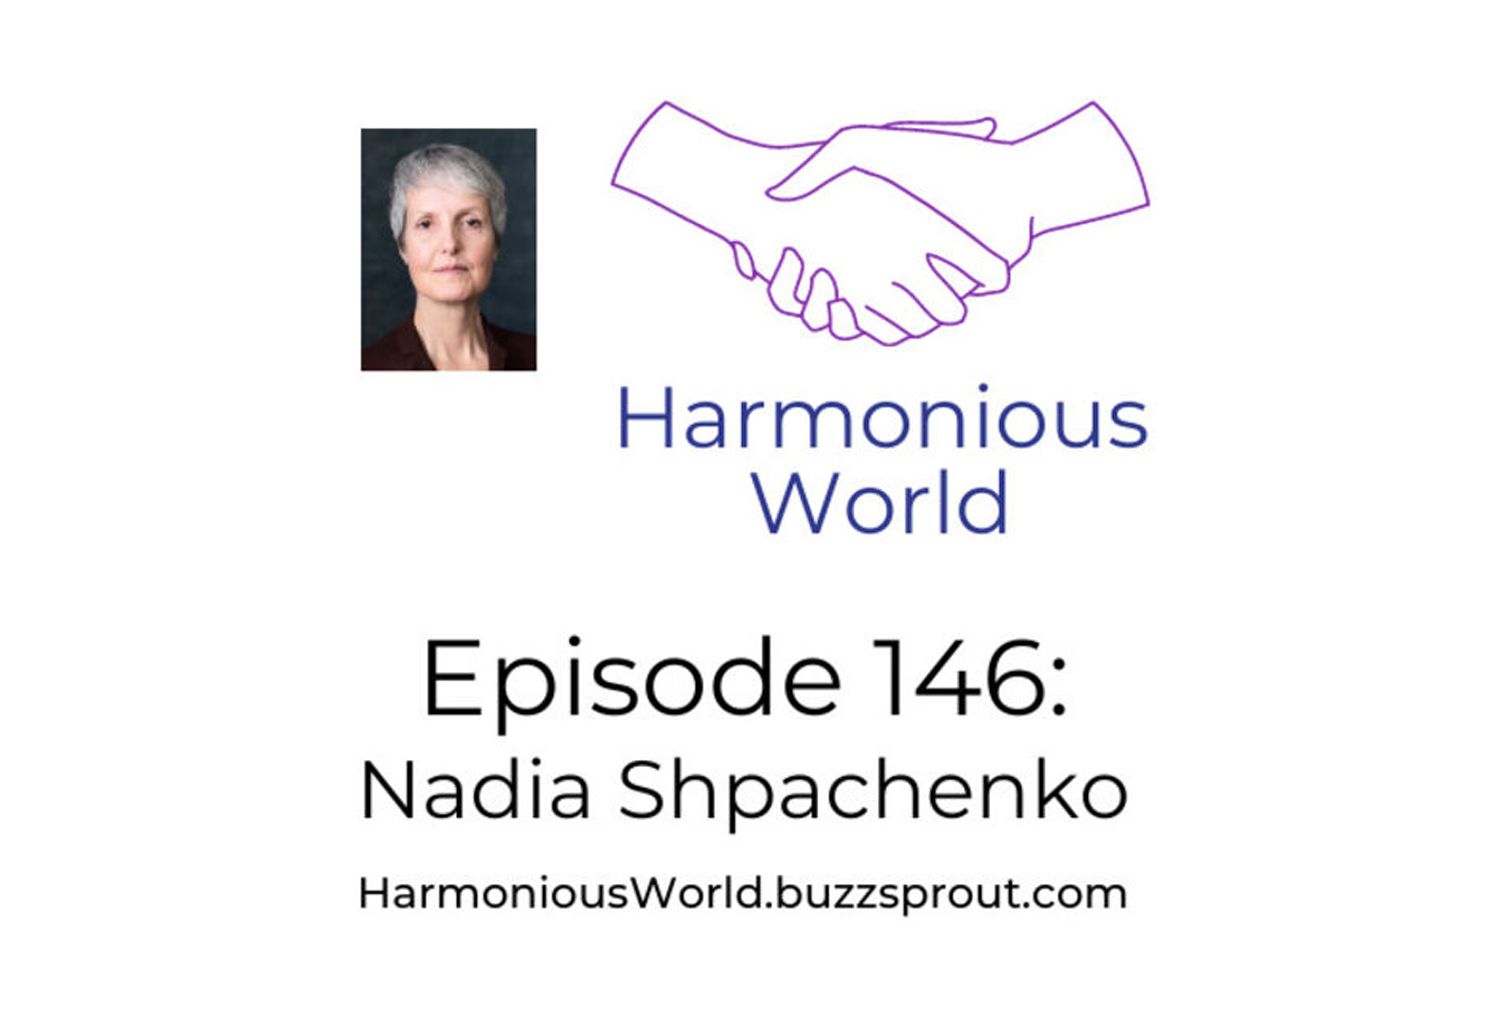 thumb - An interview with Hilary Seabrook for "Harmonious World"